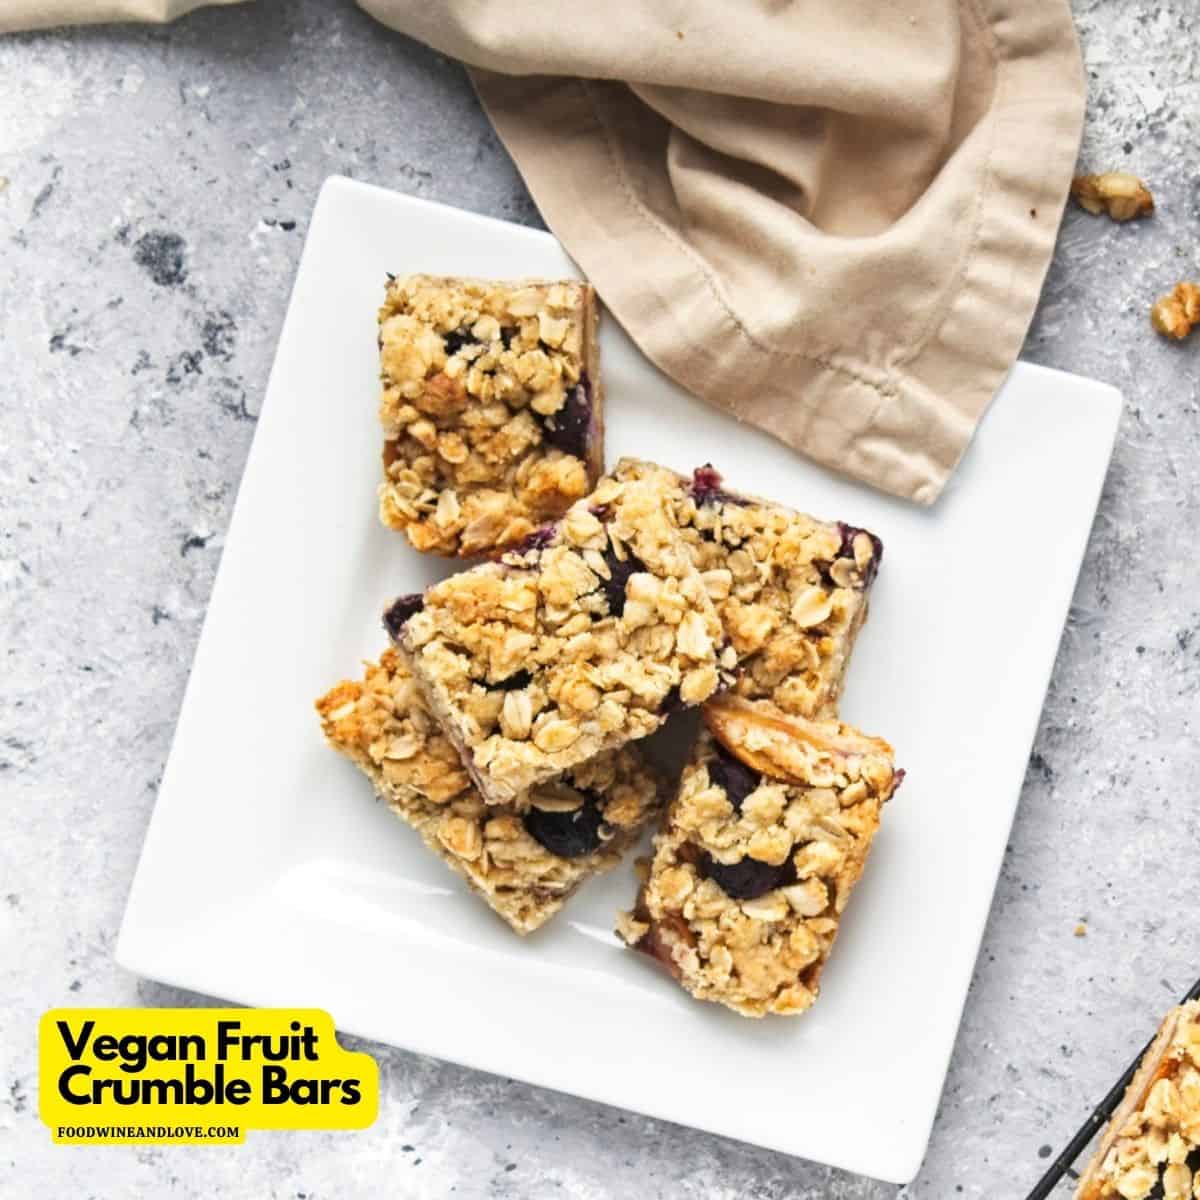 Vegan Fruit Crumble Bars are a simple layered dessert or snack recipe made with healthy ingredients including blueberries and oats.